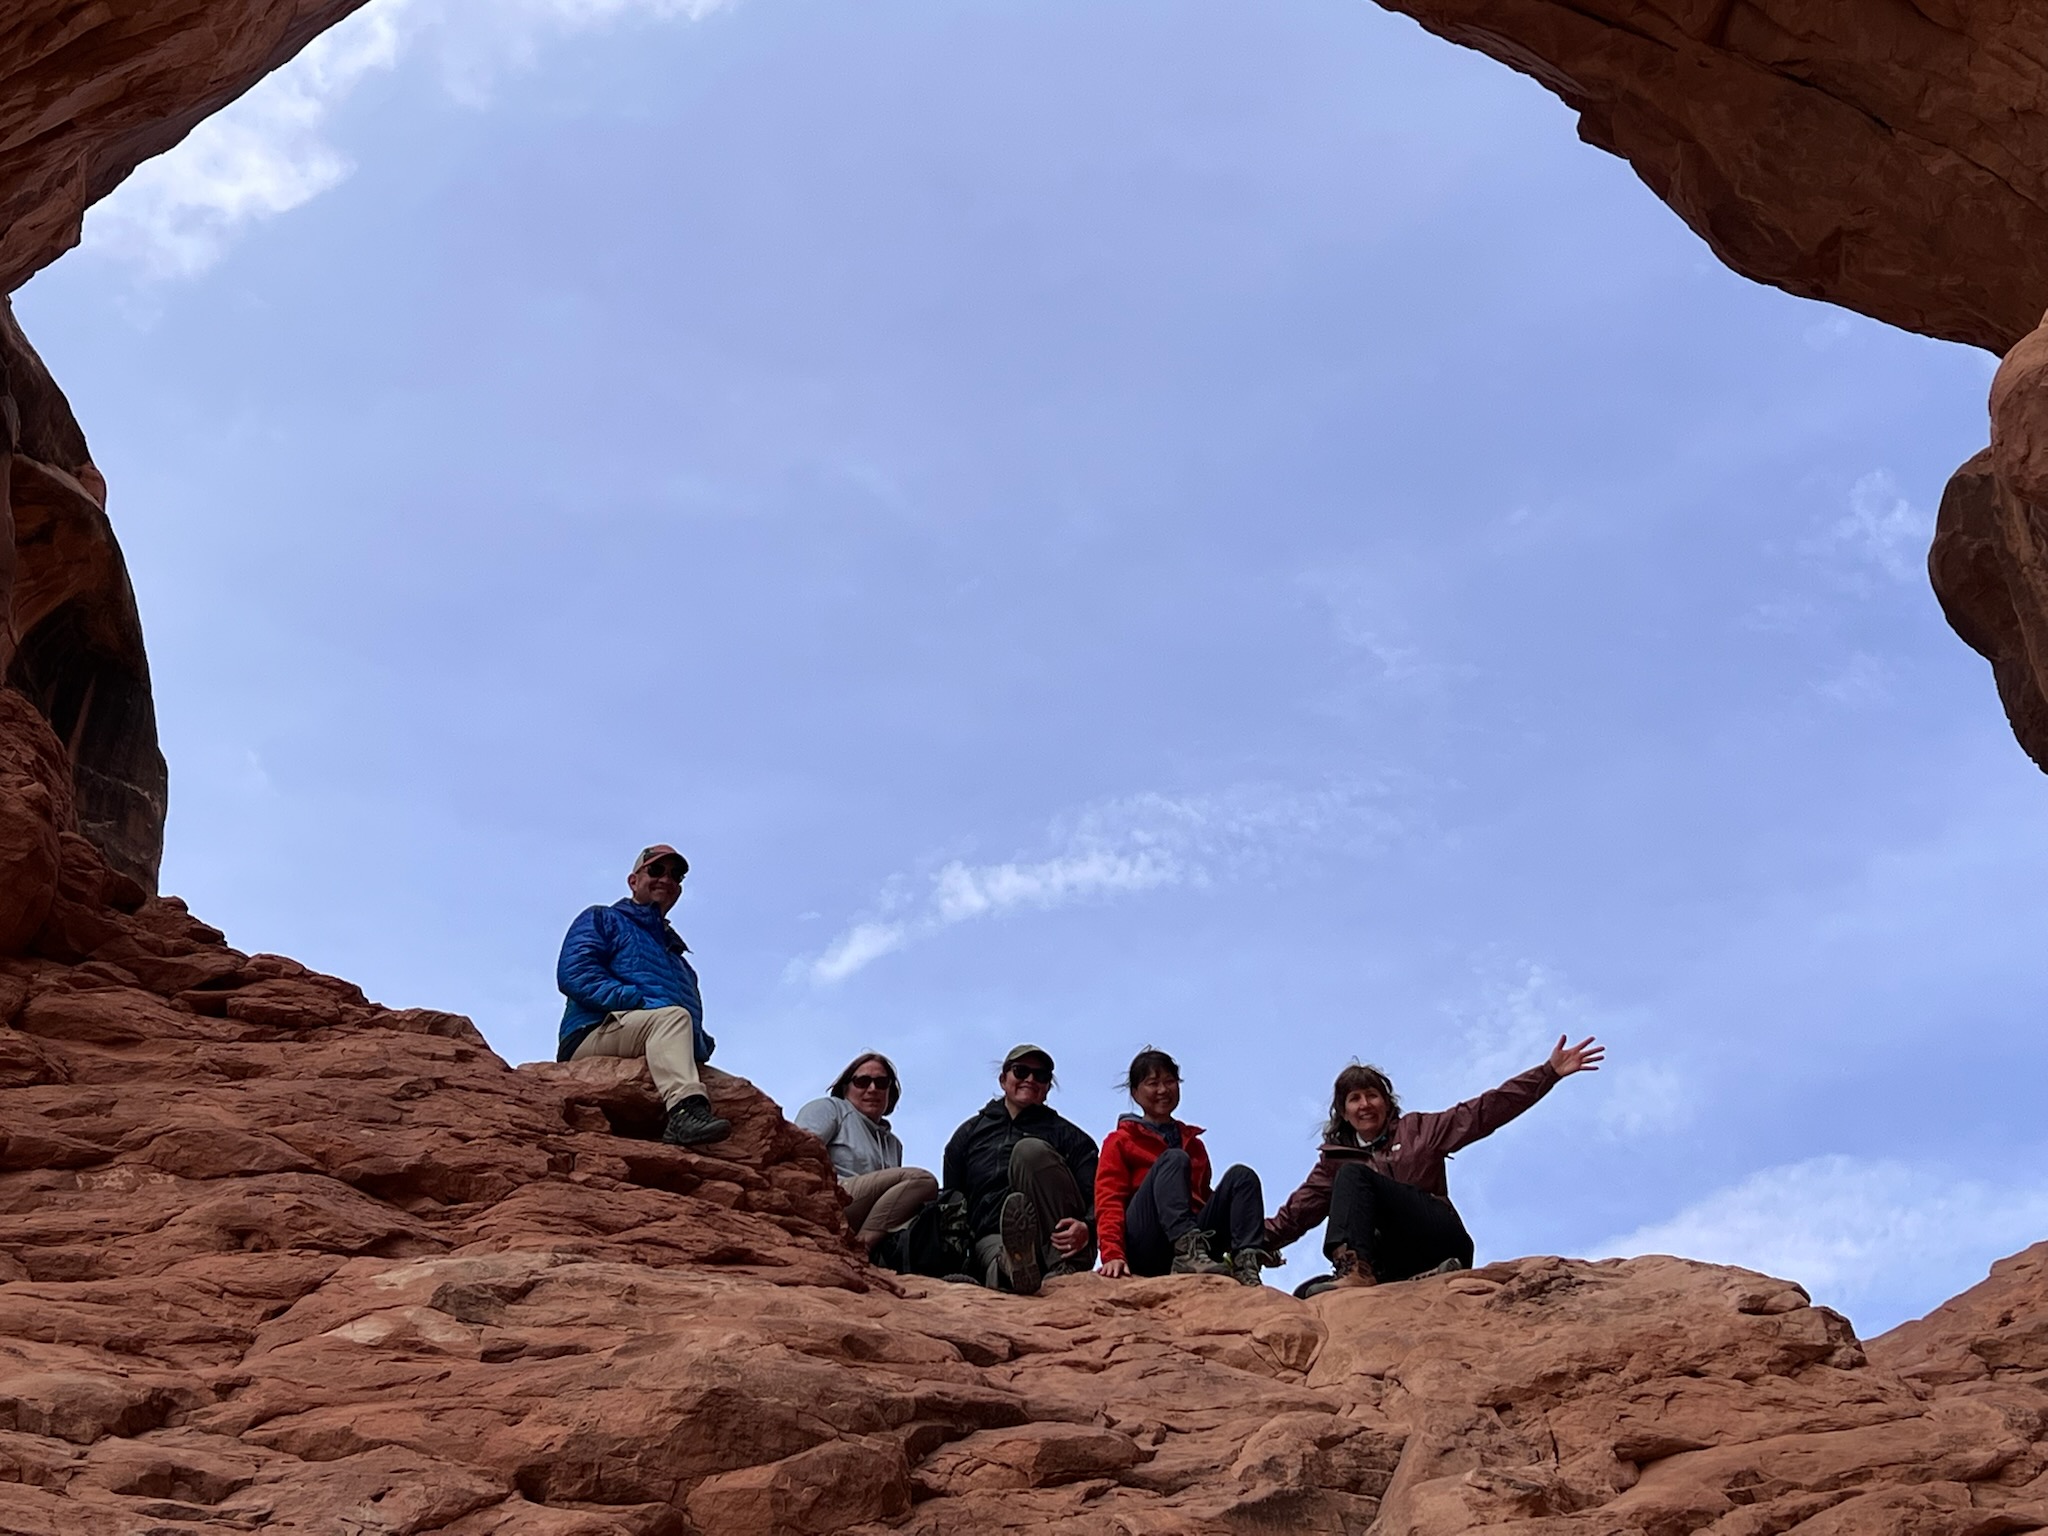 adventures for all group posing on arched rocks in utah